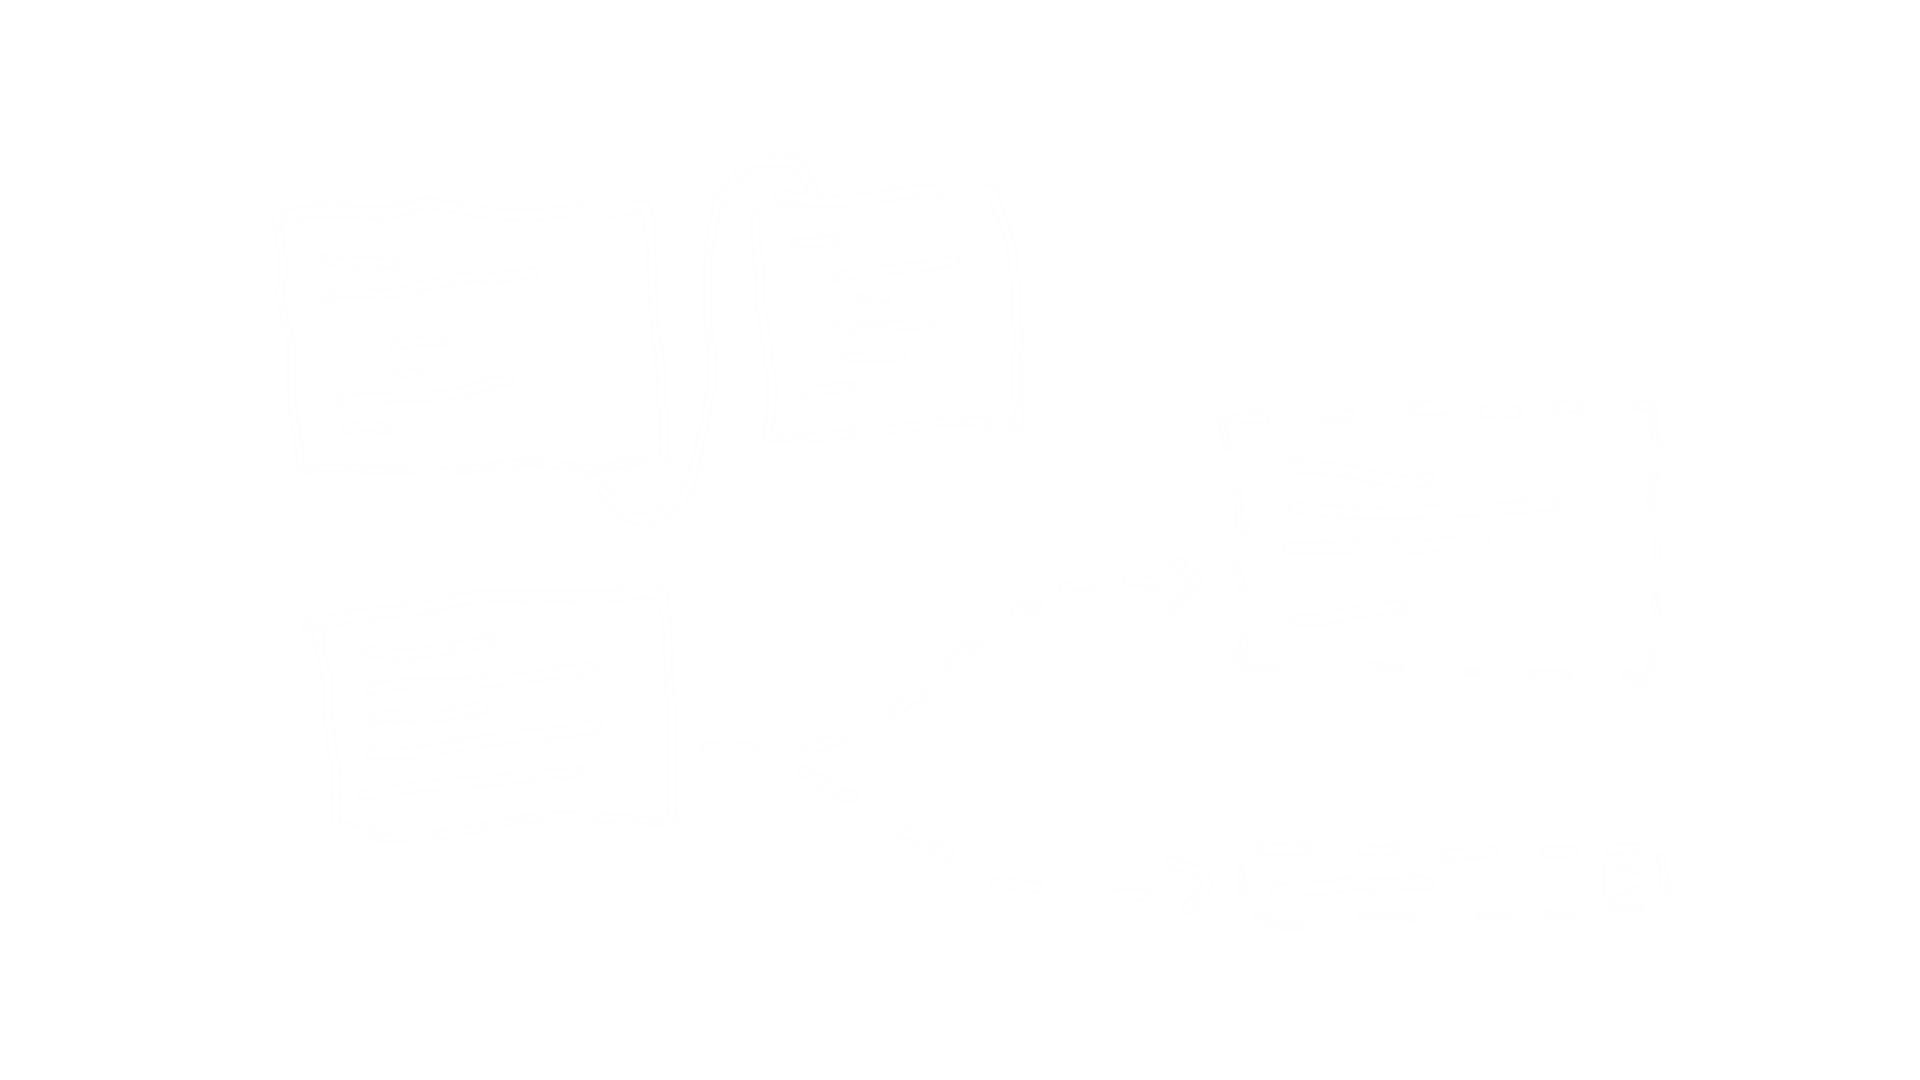 Hand-drawn diagram showing 2D-positioned blocks of code with links between them.